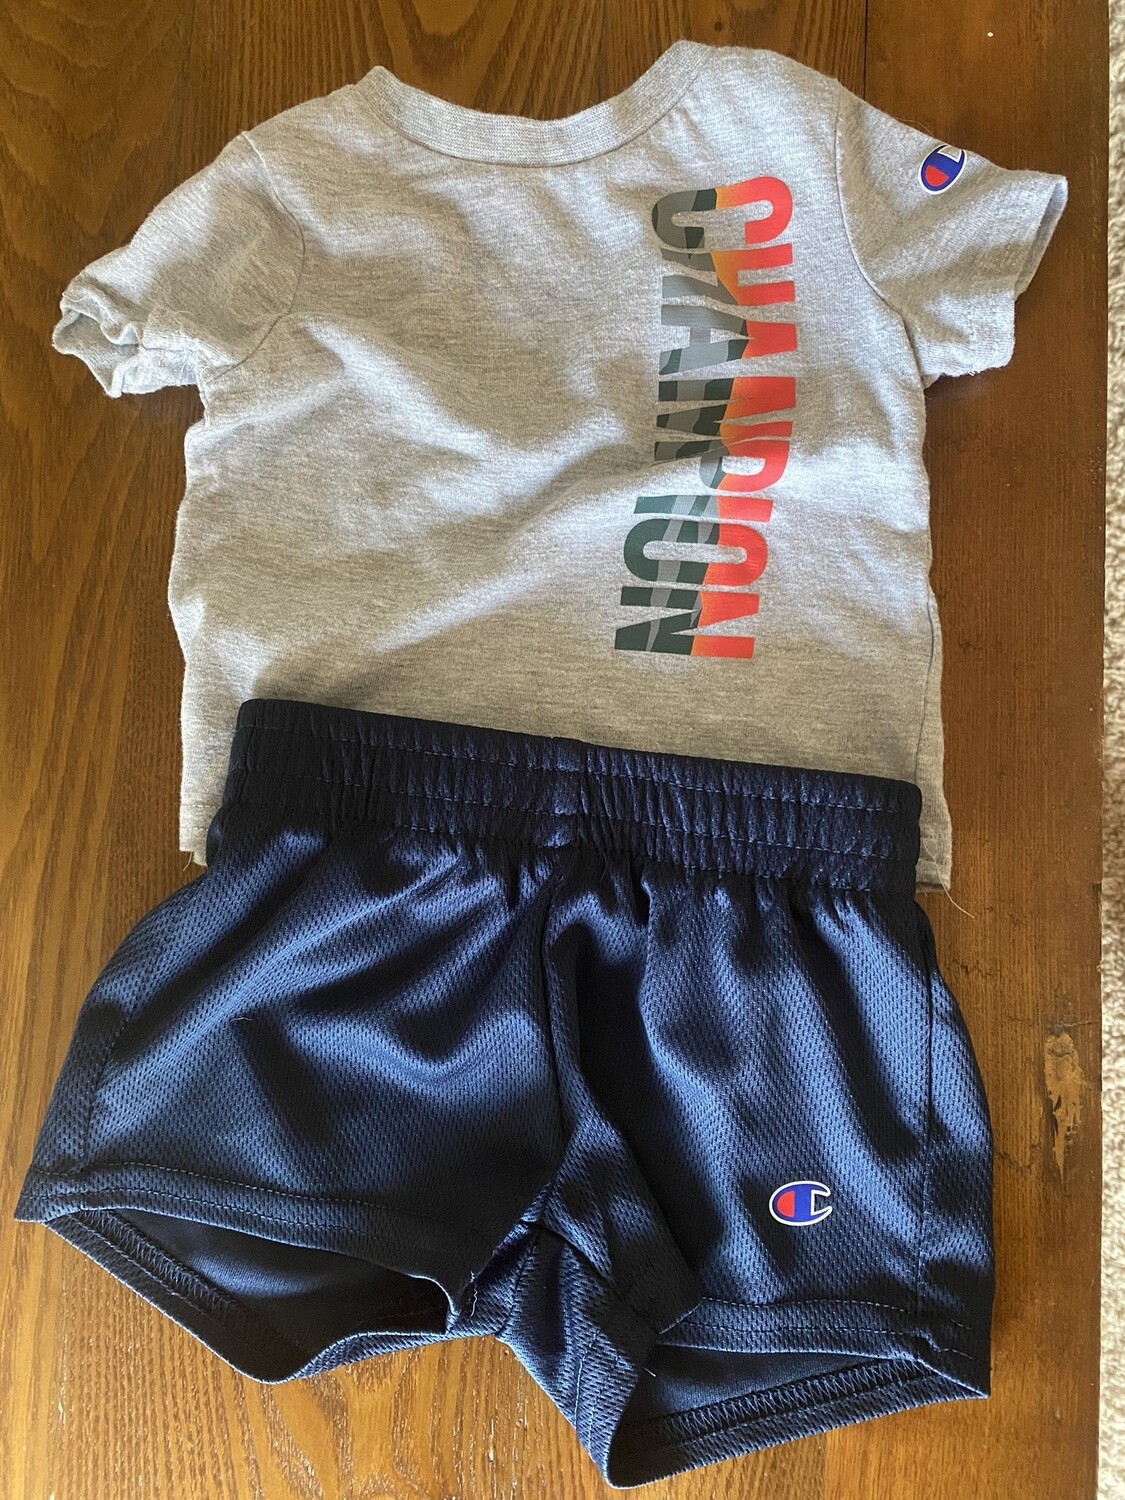 Champion brand outfit